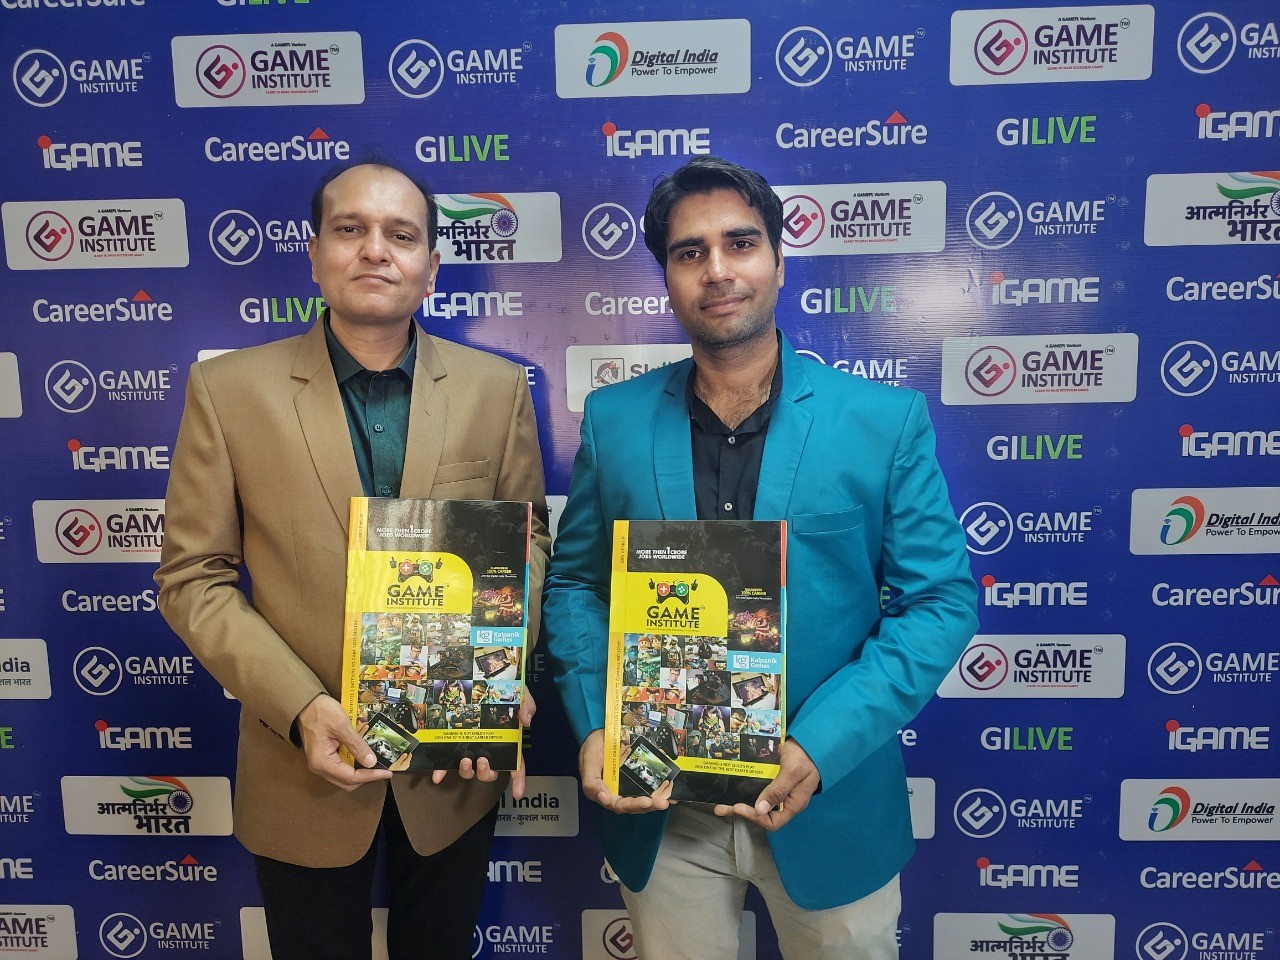 Game institute India launches CareerSure Courses to learn Gaming, Coding, Animation, Tech, VFX, Comics (AVGC) sector and Artificial Intelligence 